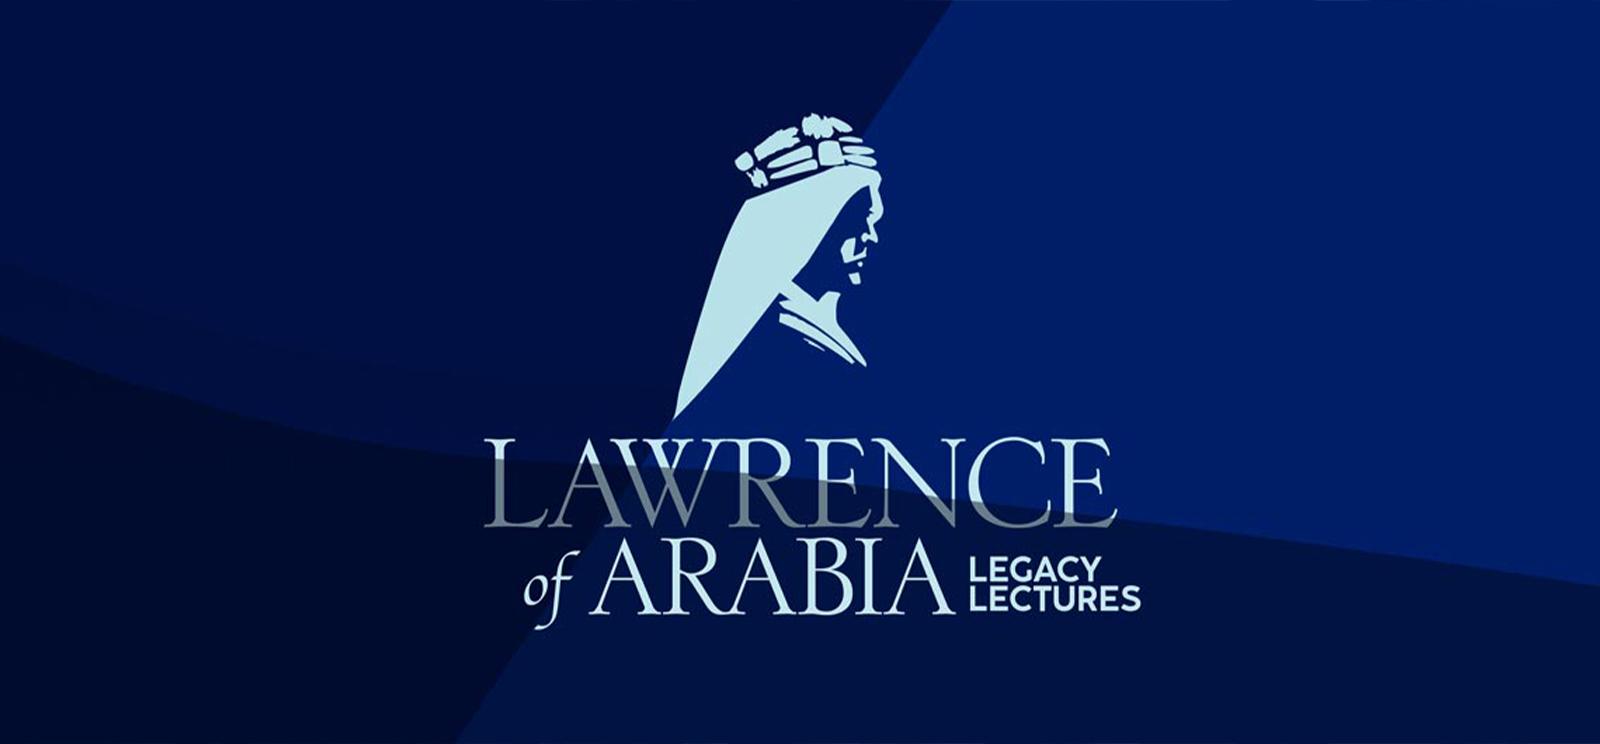 Image: silhouette of a man wearing a head covering. Text: Lawrence of Arabia / Legacy Lectures